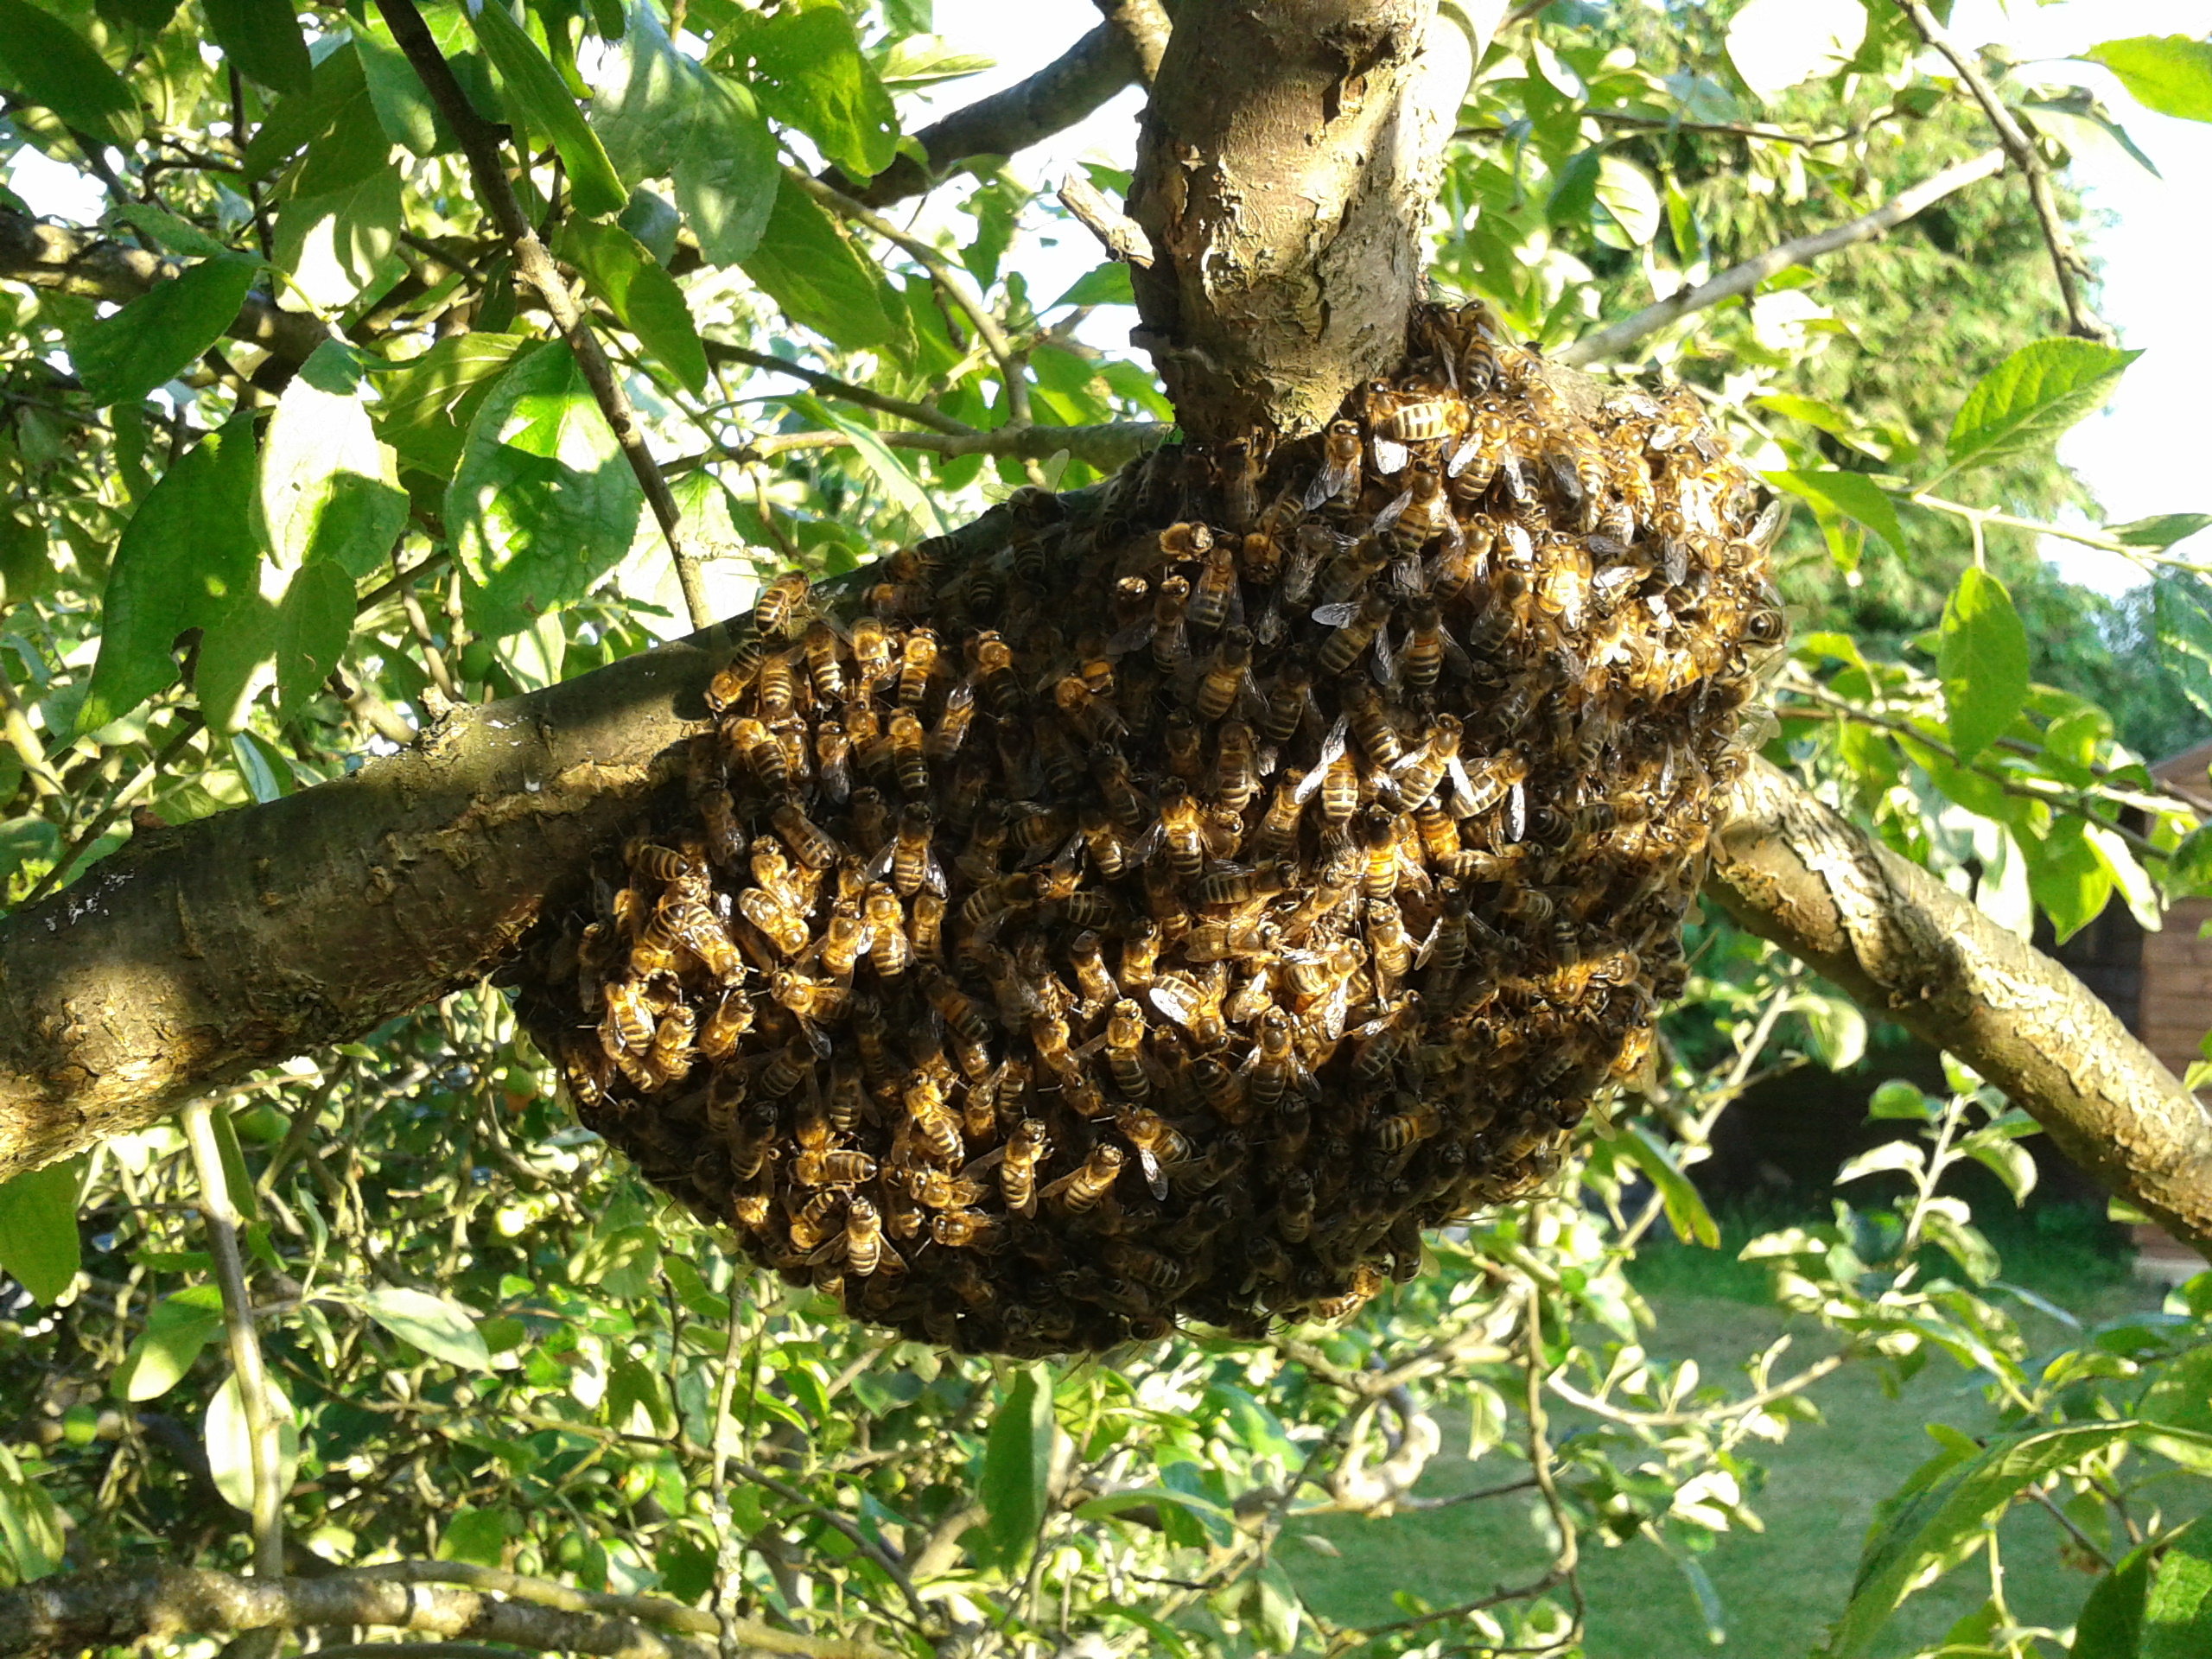 Small swarm on the fruit tree